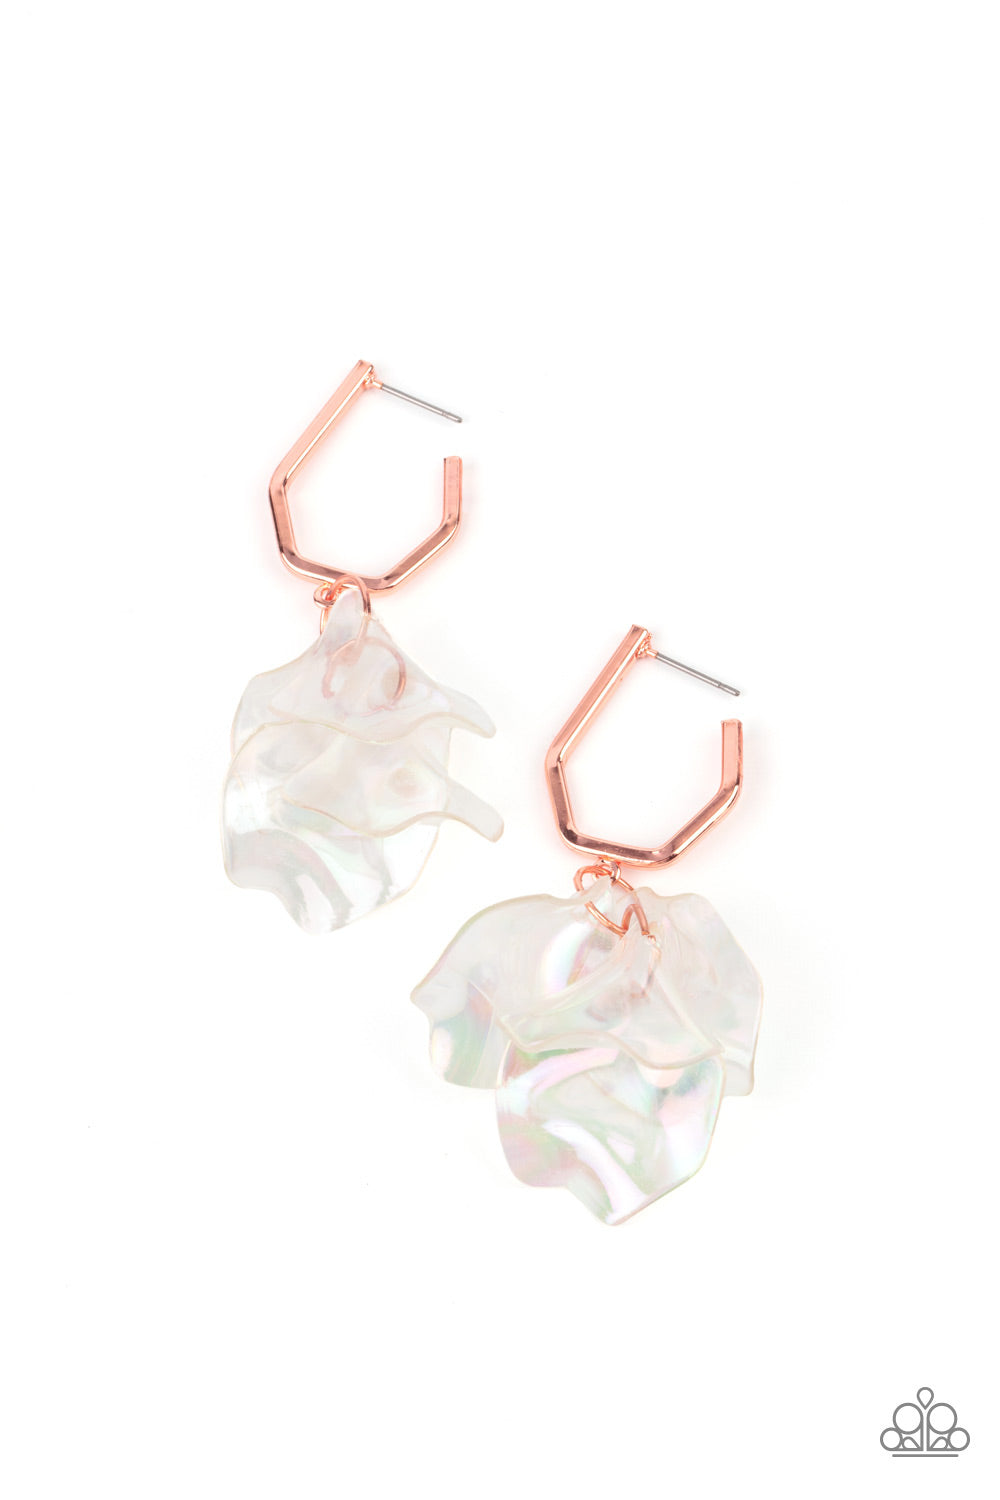 Paparazzi Accessories - A cluster of iridescent acrylic petals swing from the bottom of a dainty shiny copper geometric hoop, creating an ethereal edge.